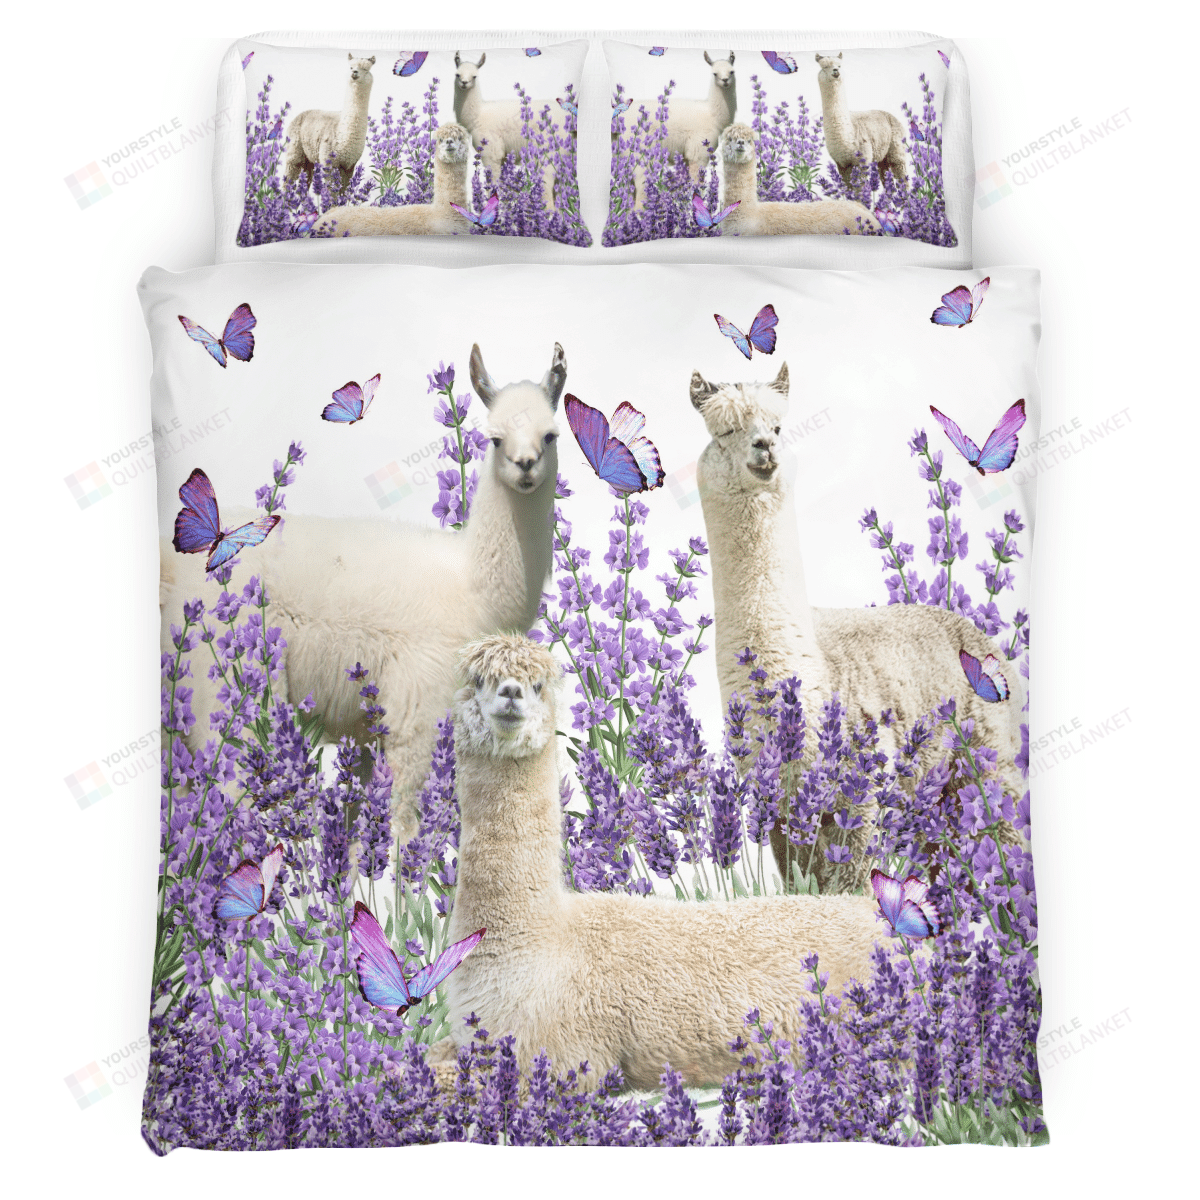 Llama And Lavender Cotton Bed Sheets Spread Comforter Duvet Cover Bedding Sets.png